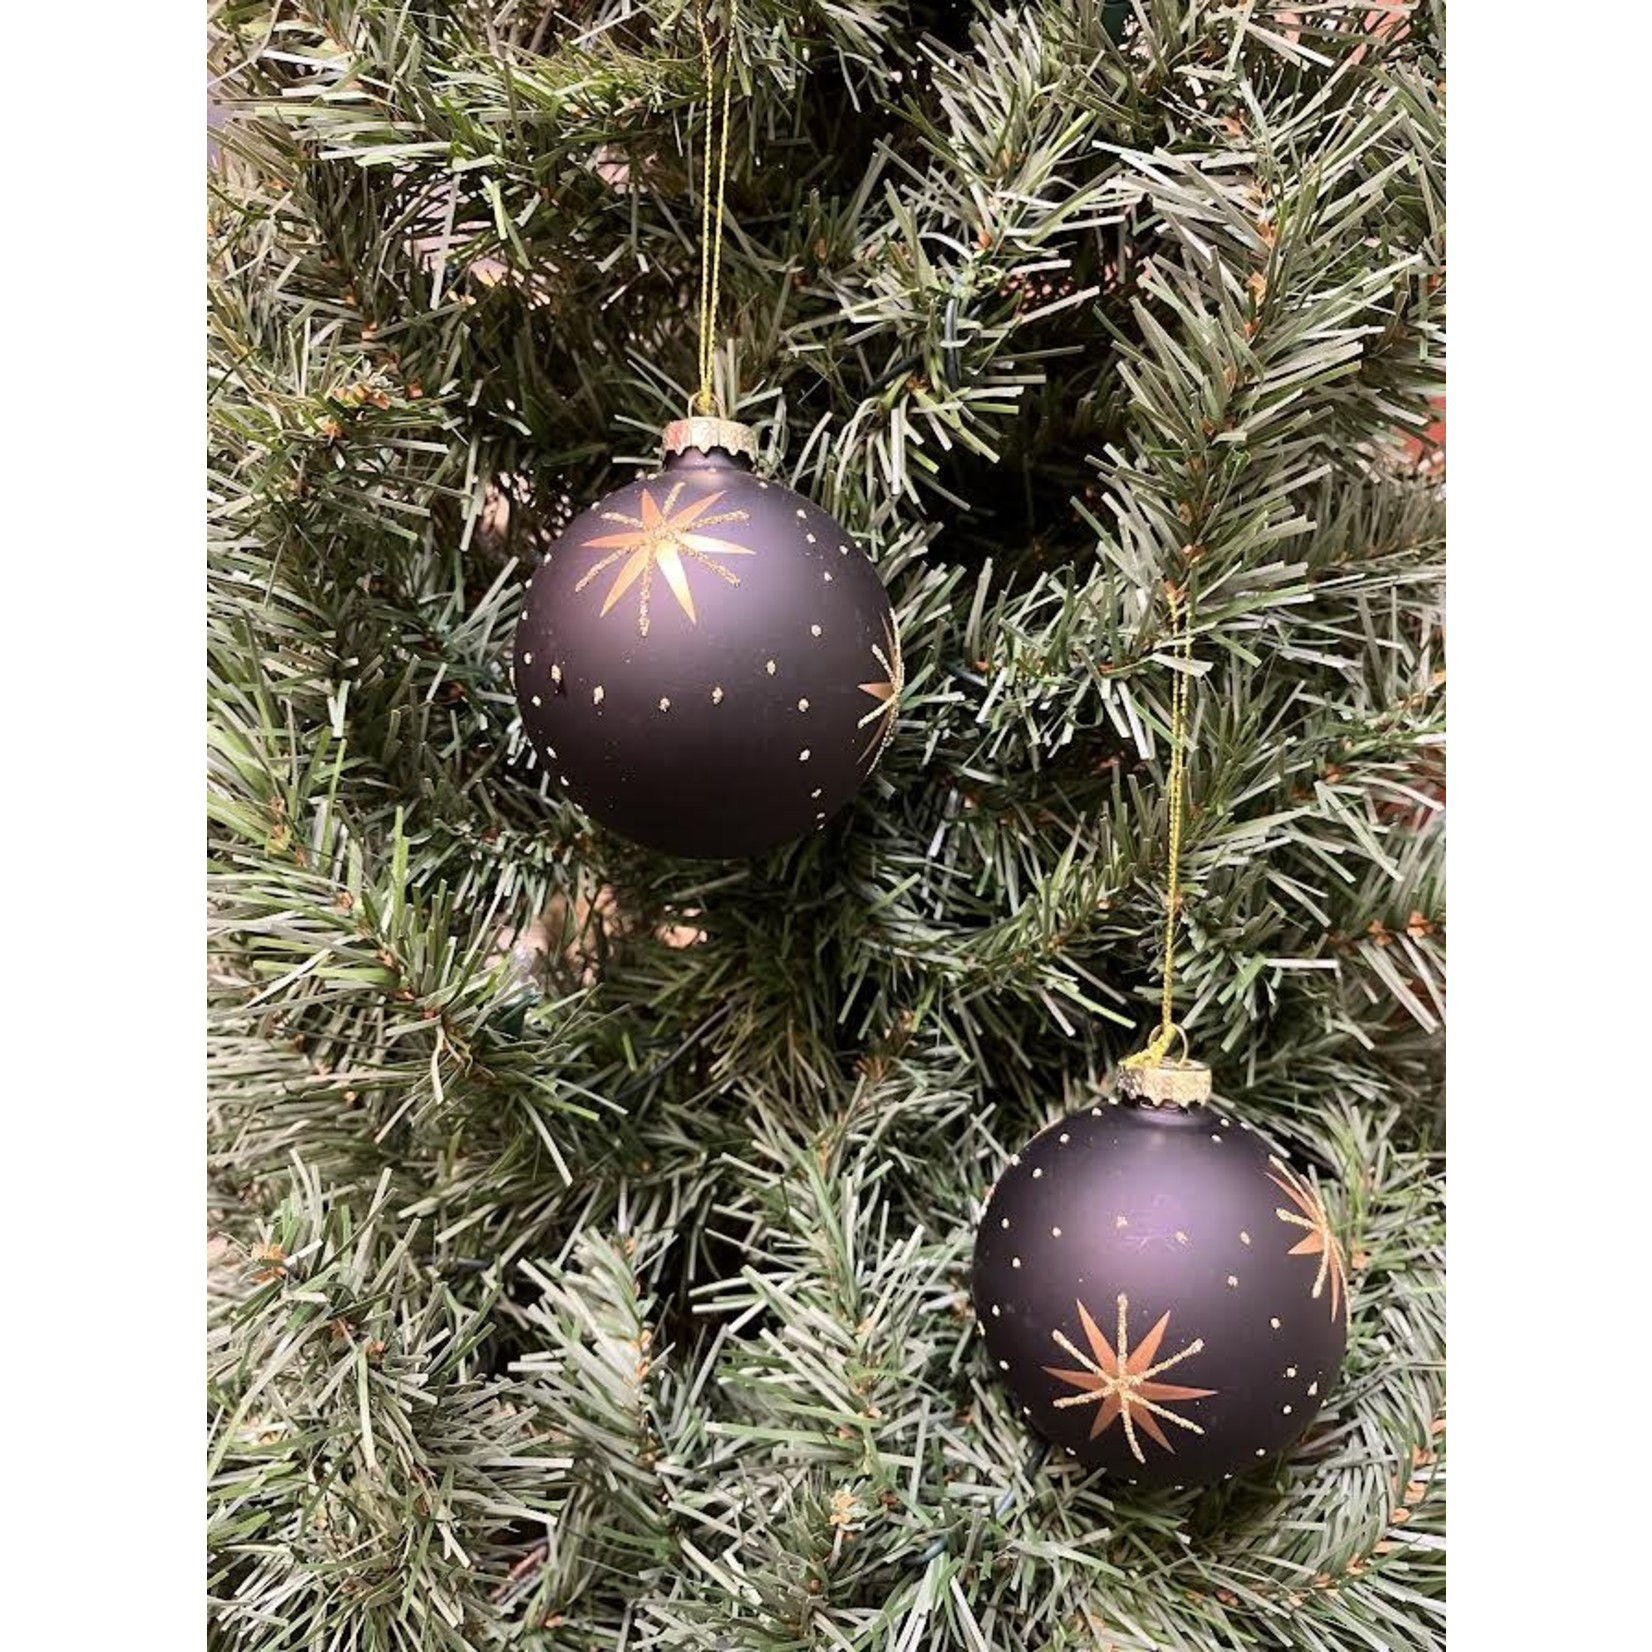 Zodax Gold and Black Star Ornament 3"